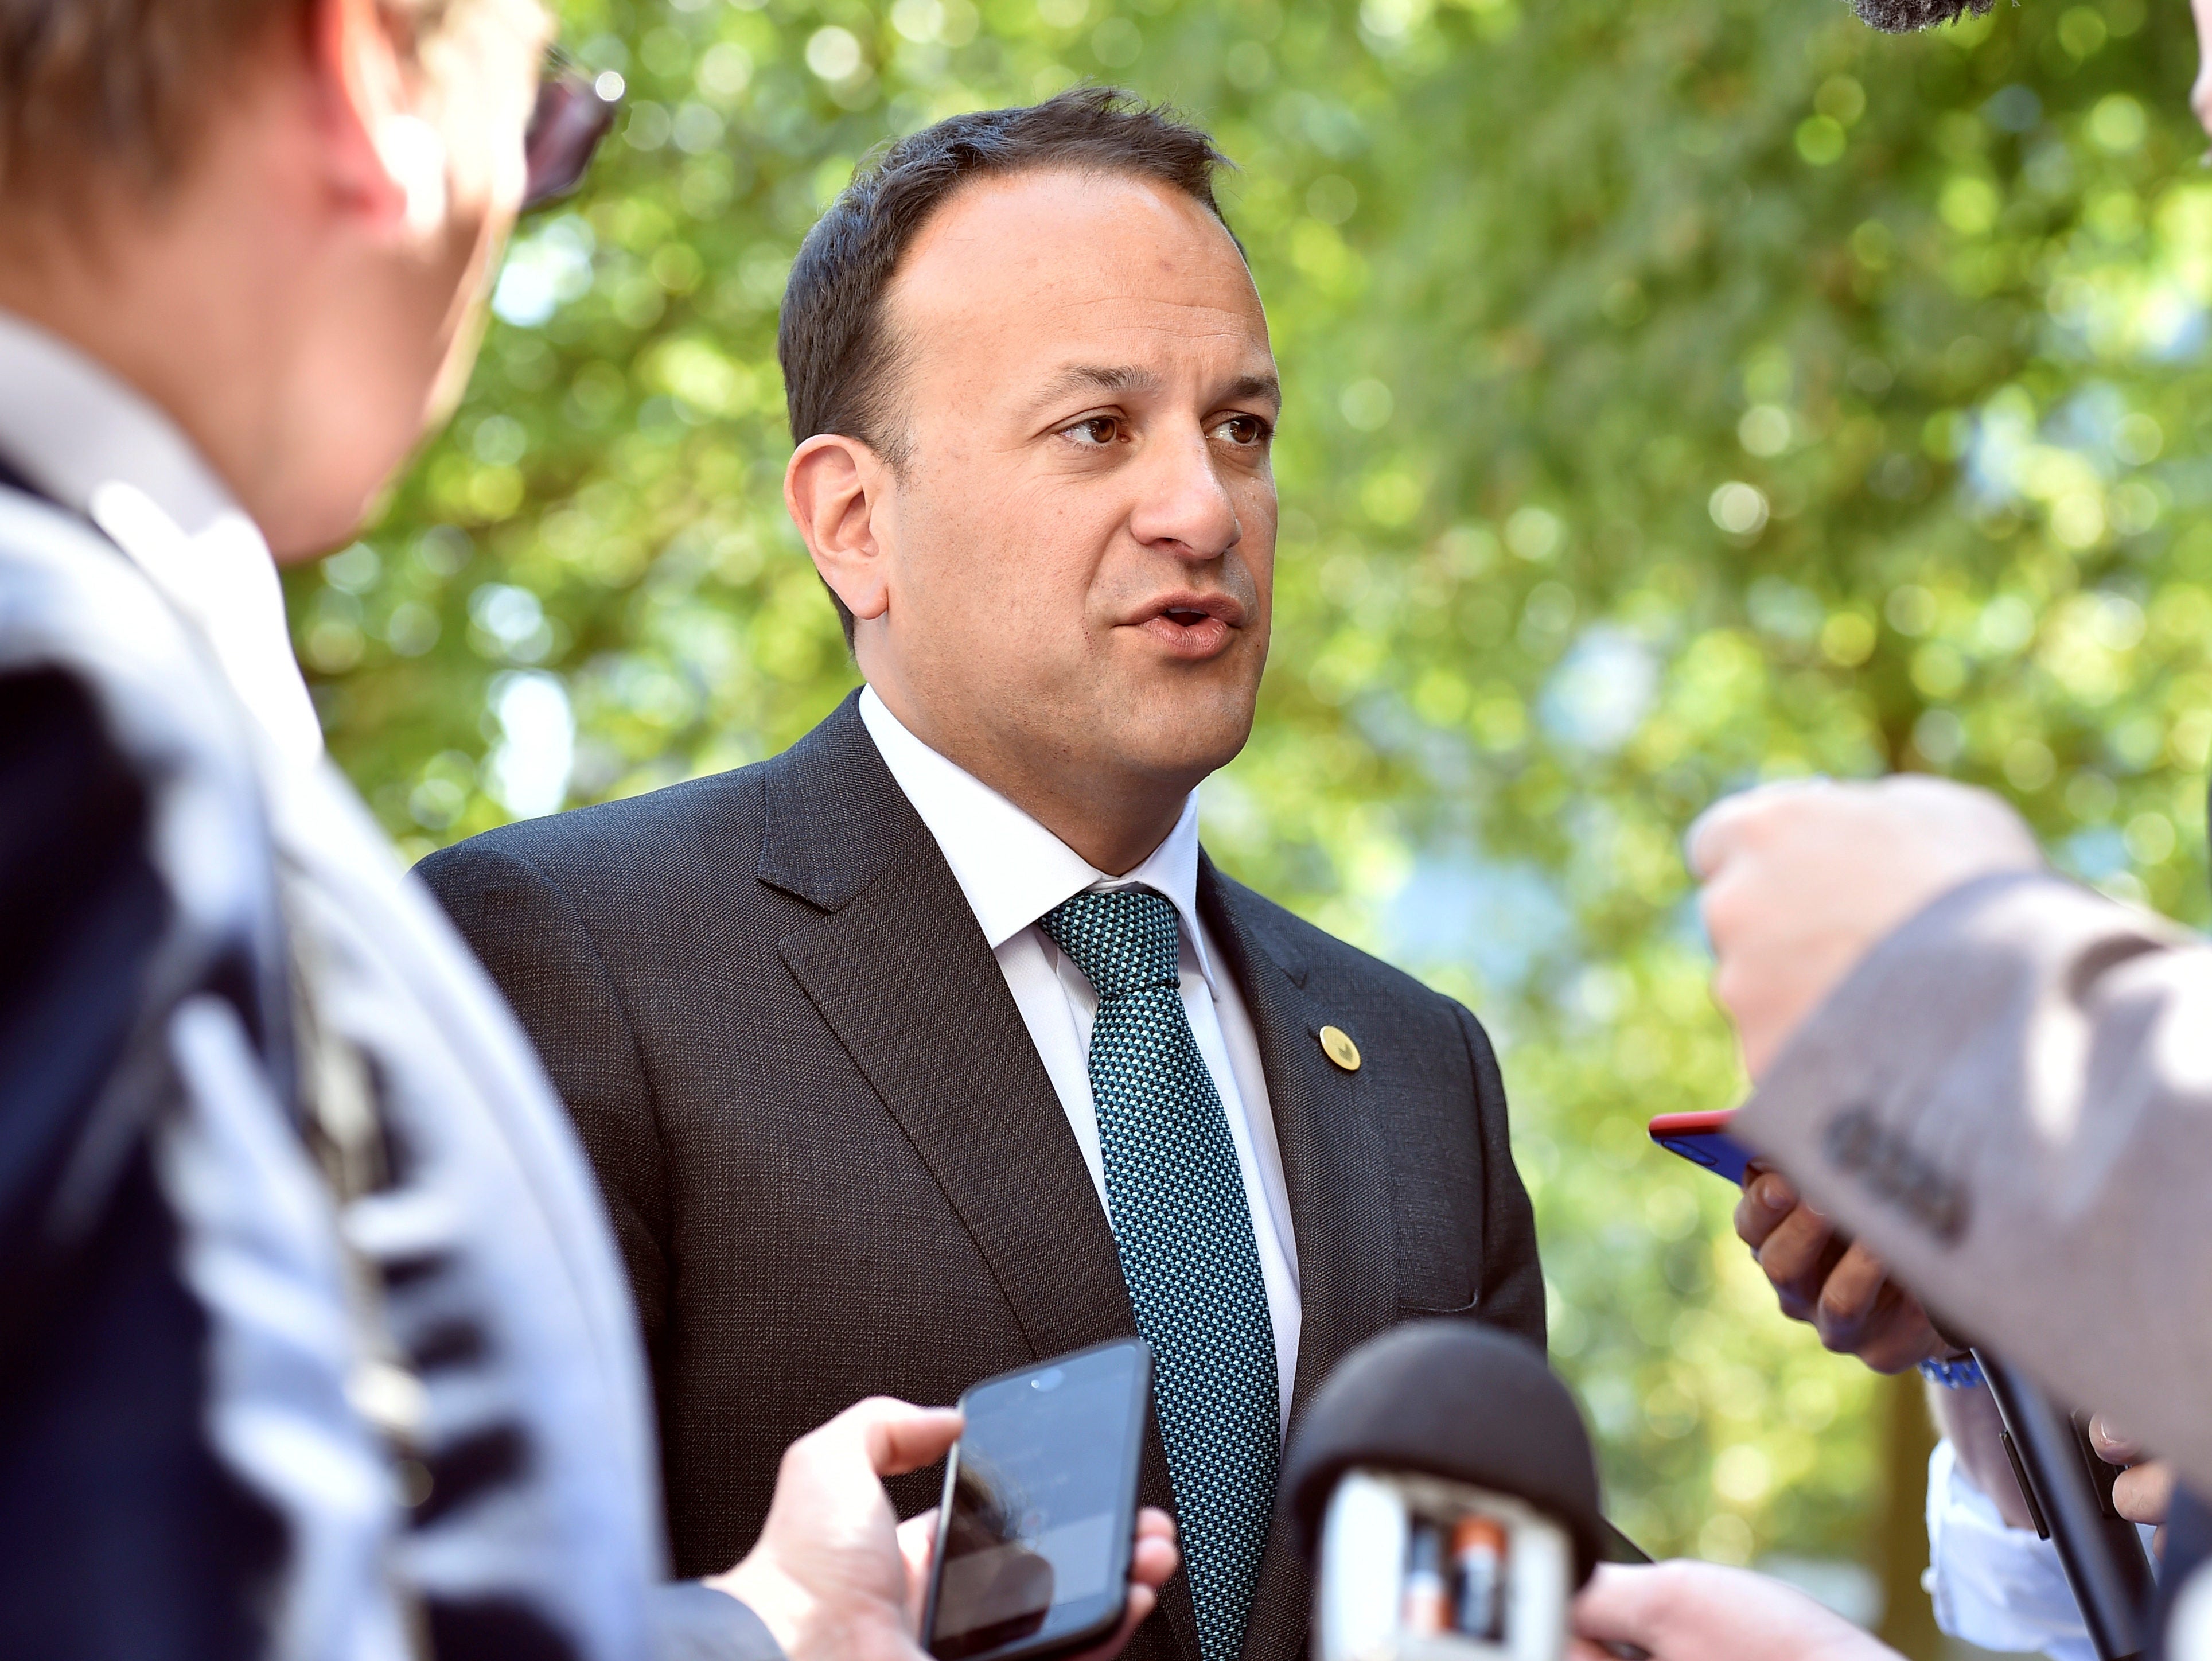 Ireland's Taoiseach declares free press 'essential' after reportedly supporting Donald Trump's criticism of the media at private lunch